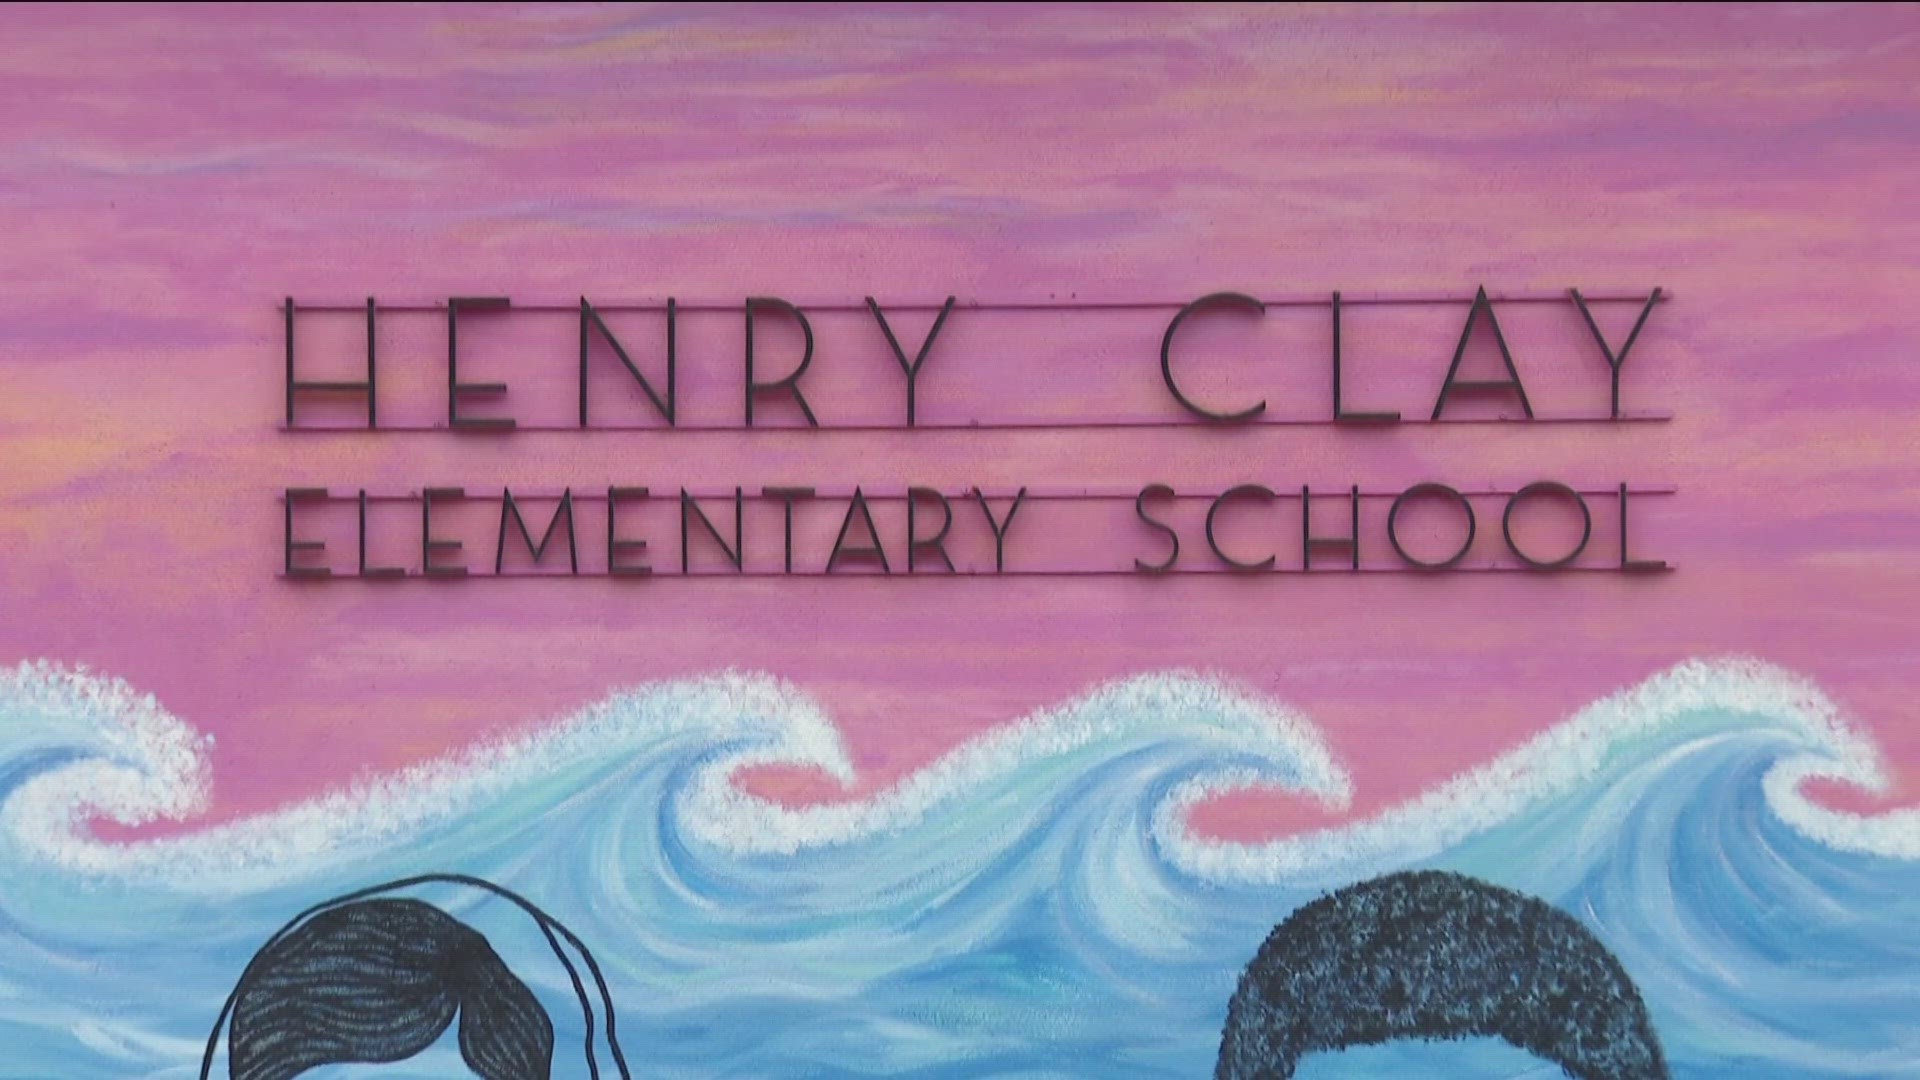 Two years after community members led the charge to change the name of Henry Clay Elementary, the new name recommendations are receiving pushback.